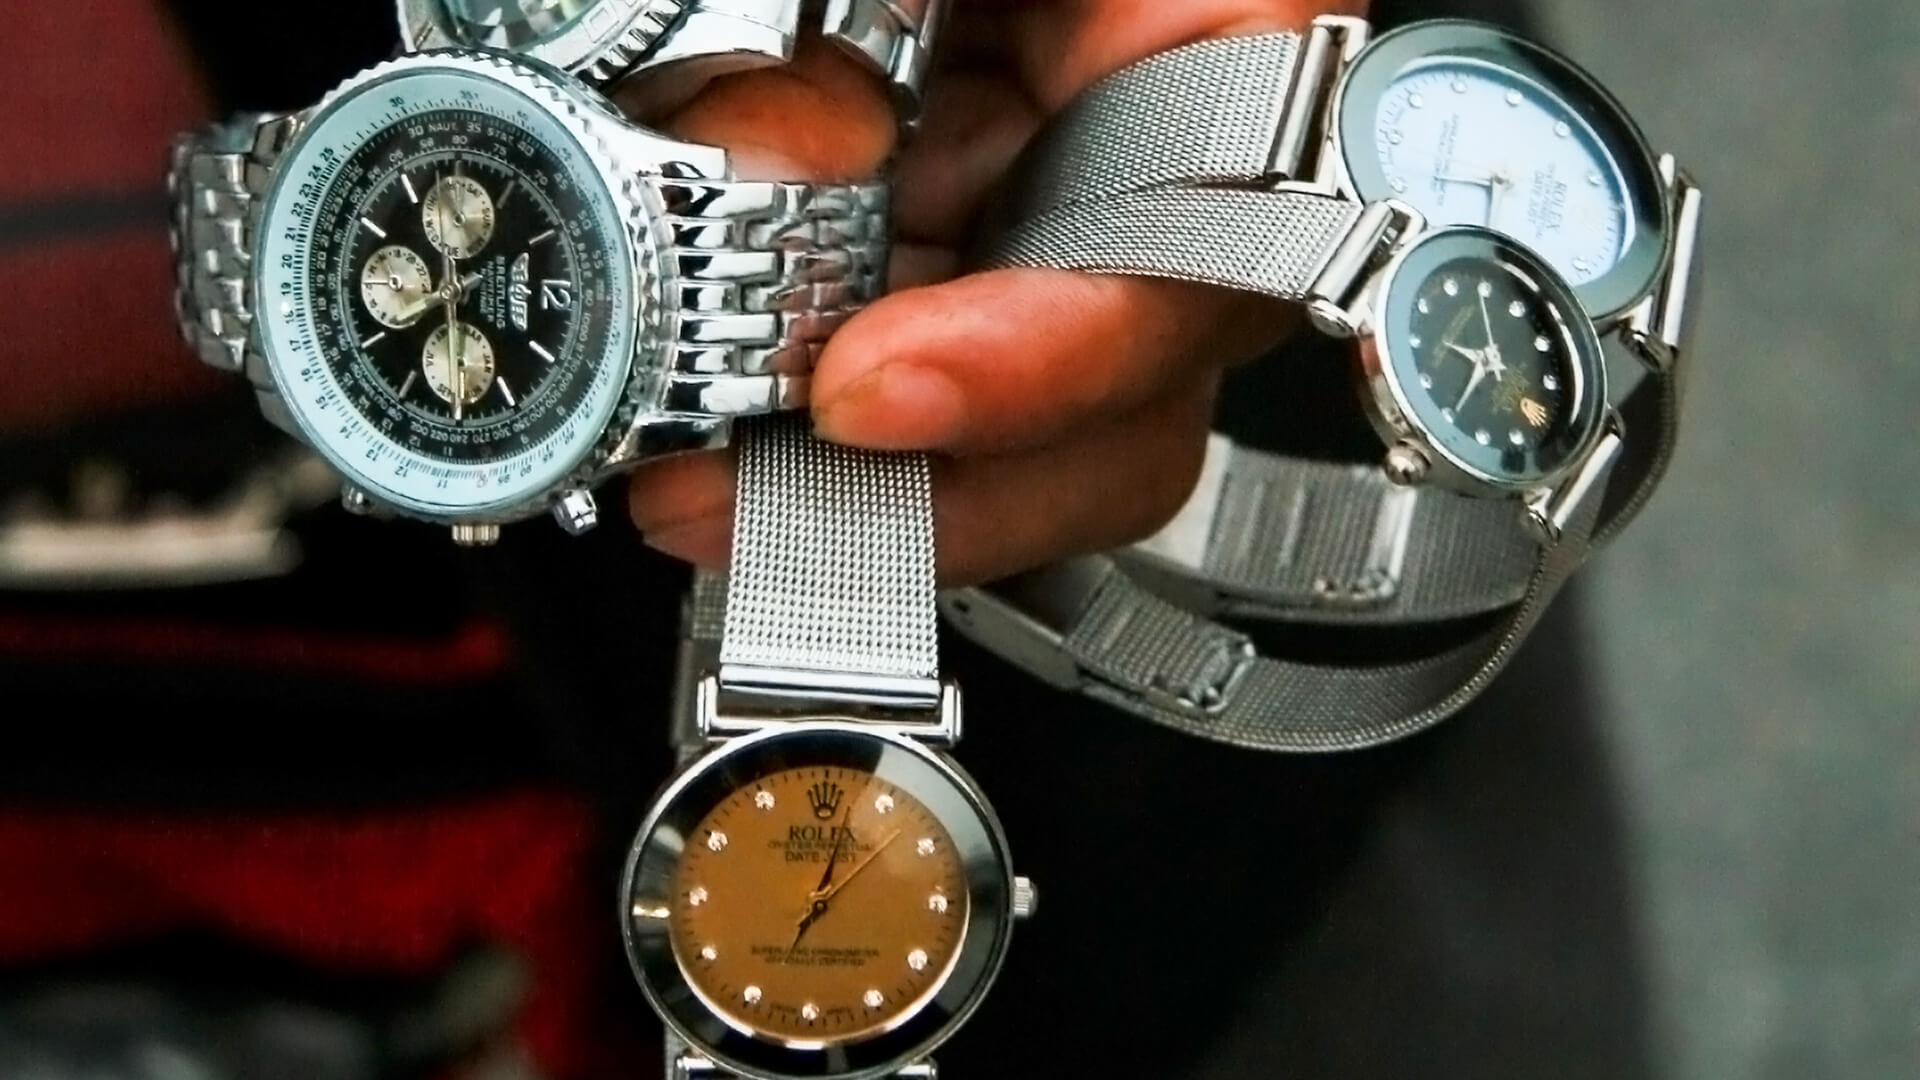 What Are World's Most Expensive Watches and How Much Do They Cost